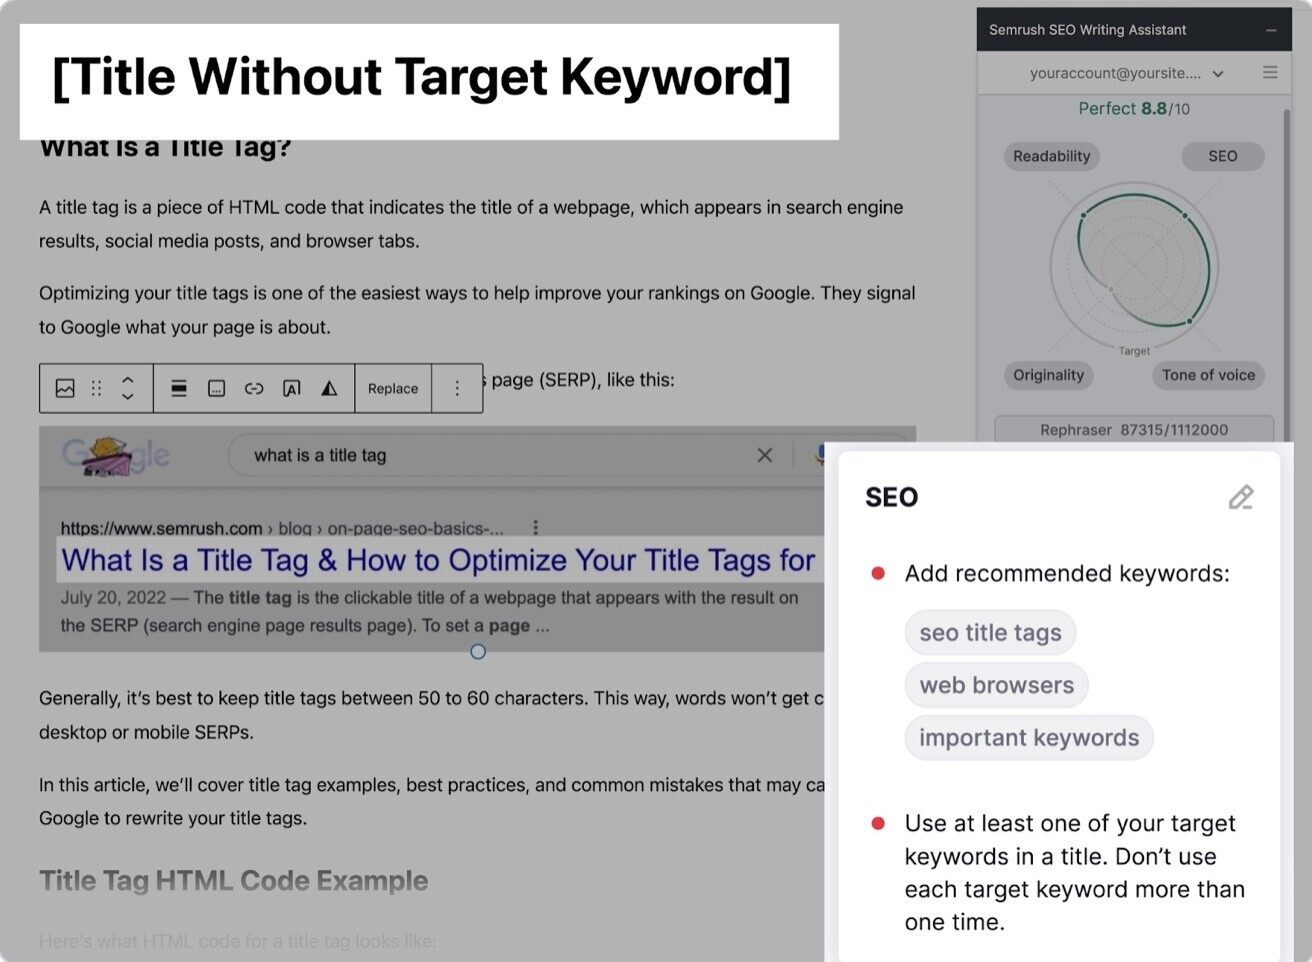 an example of SEO suggestions in Semrush SEO Writing Assistant